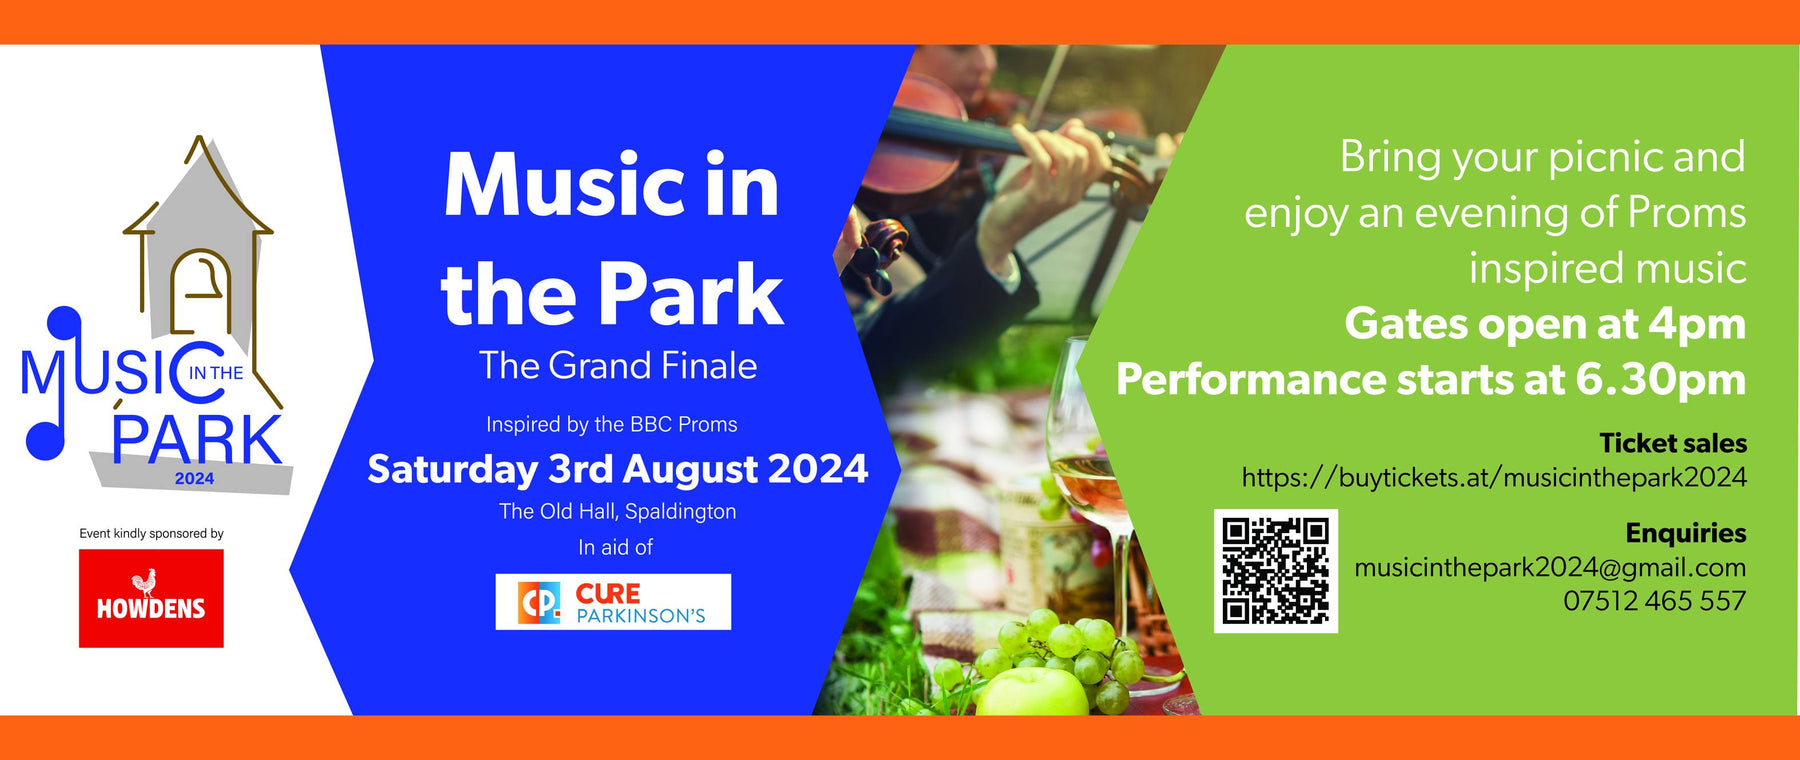 Music in the Park in aid of Parkinson’s Disease